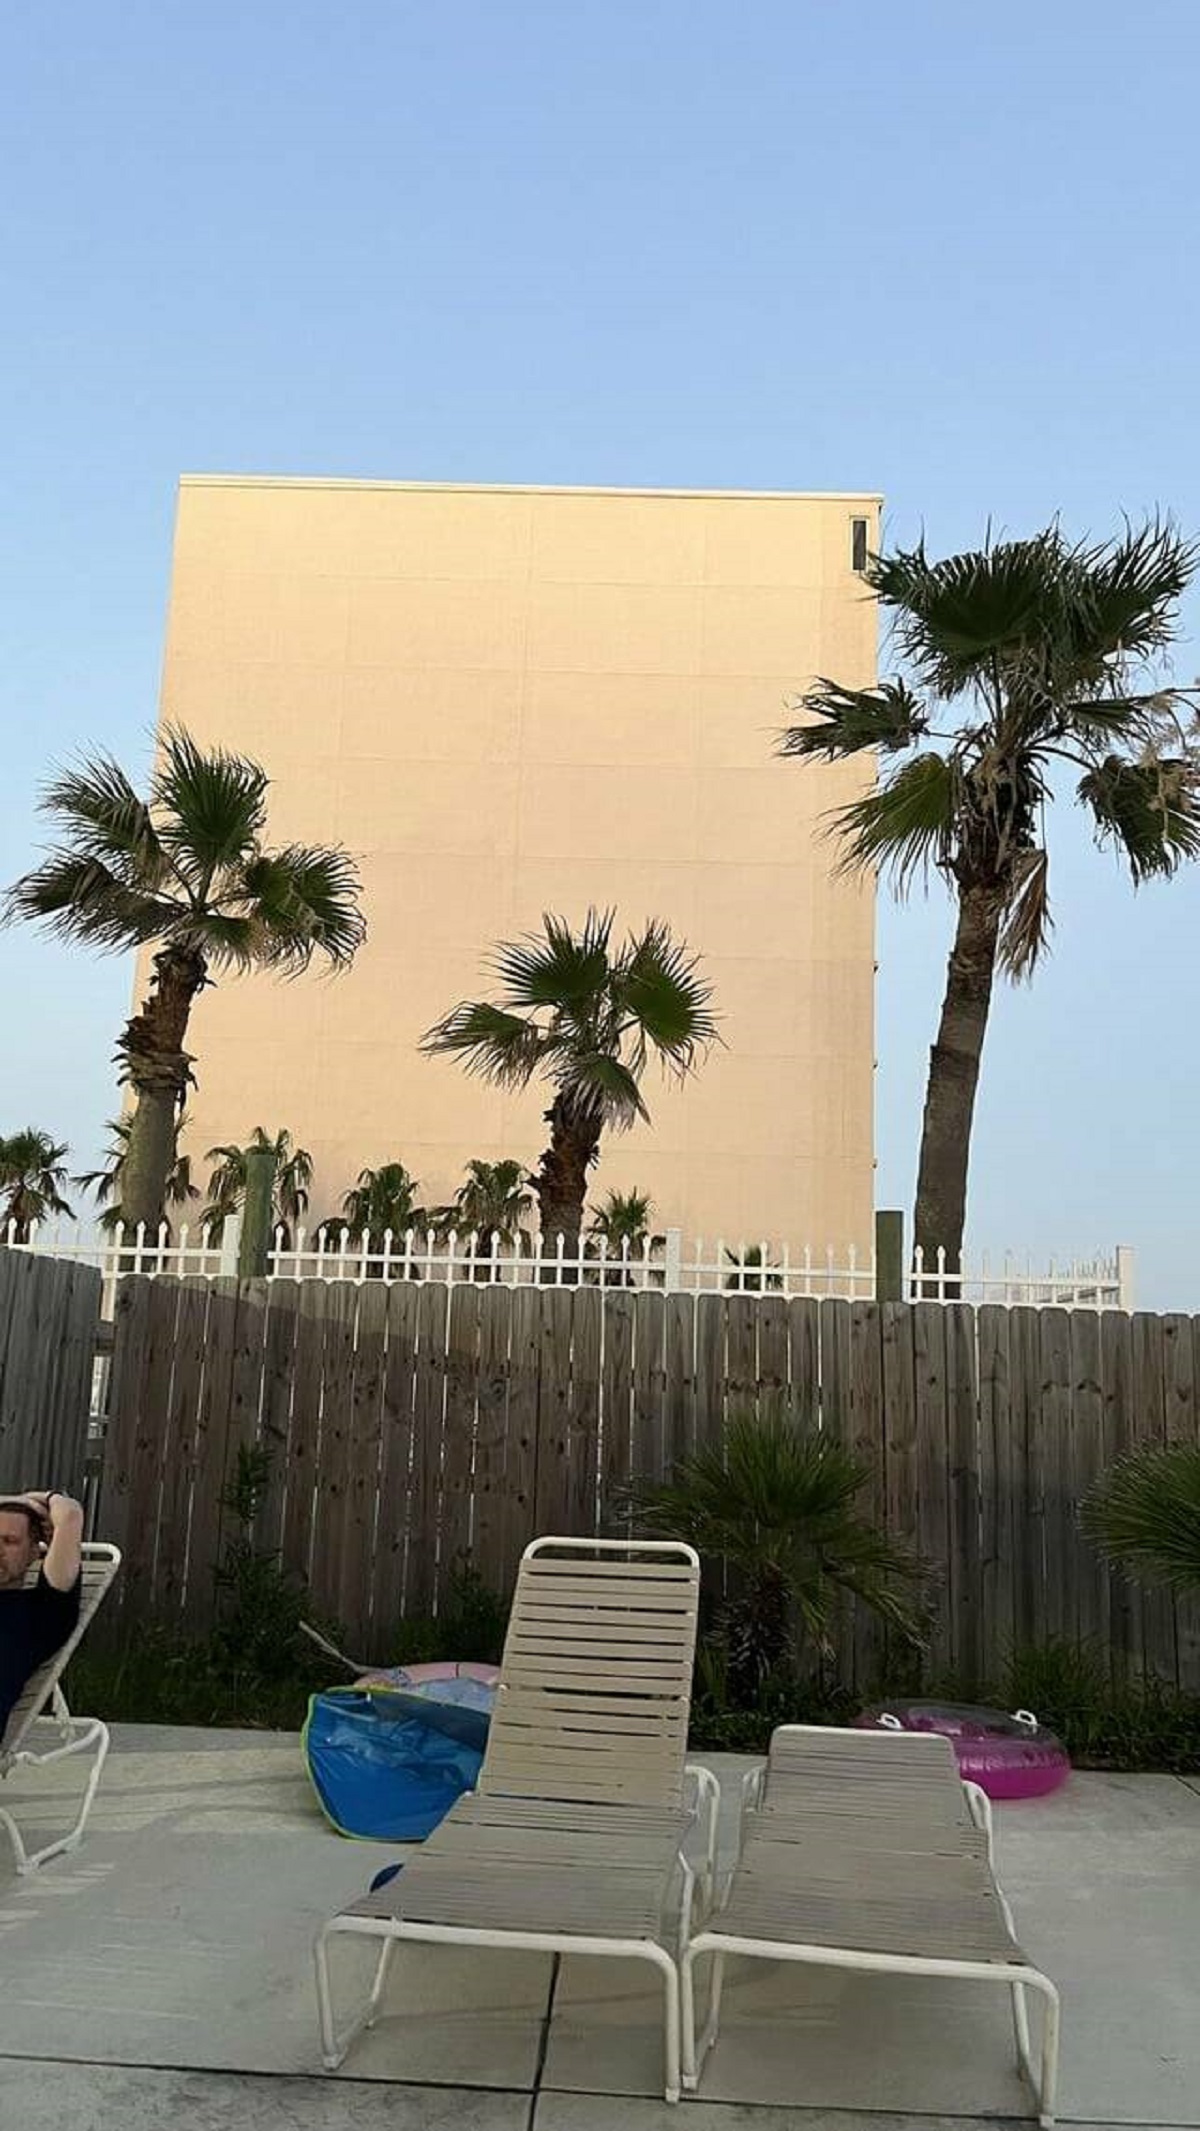 "This building in Orange Beach Alabama with just a single window on the side"